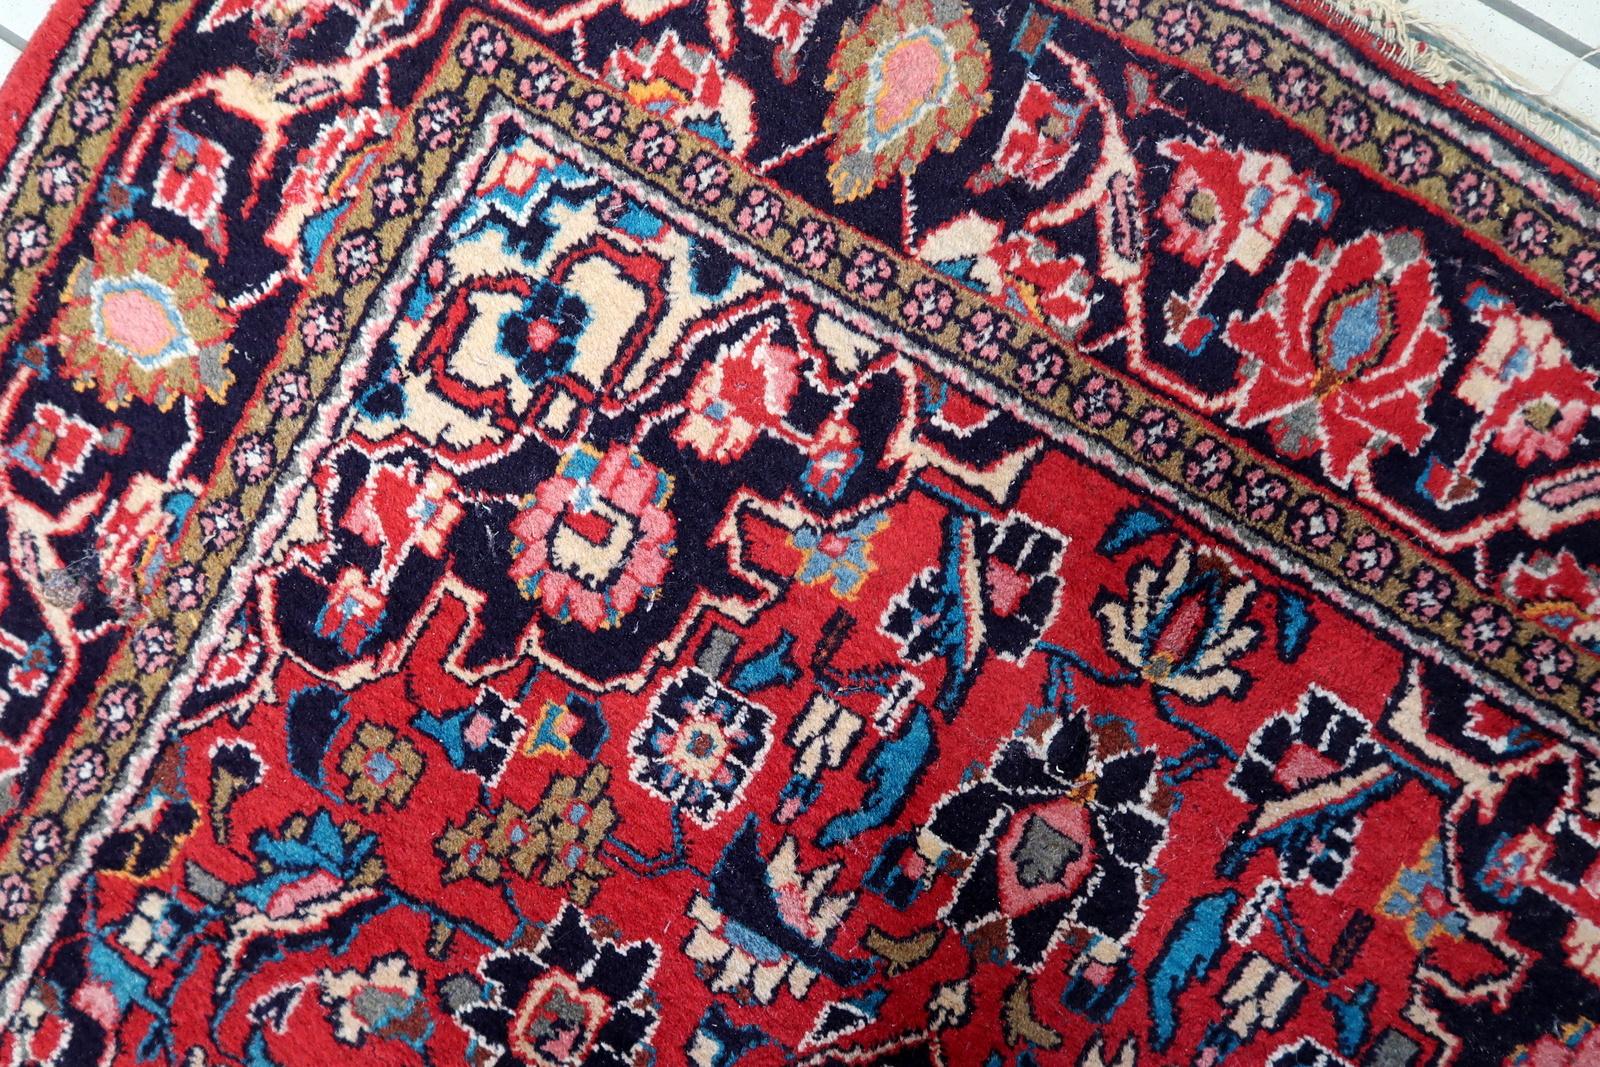 Hand-Knotted Handmade Antique Persian Style Kashan Rug 4.2' x 6.5', 1920s - 1C1119 For Sale